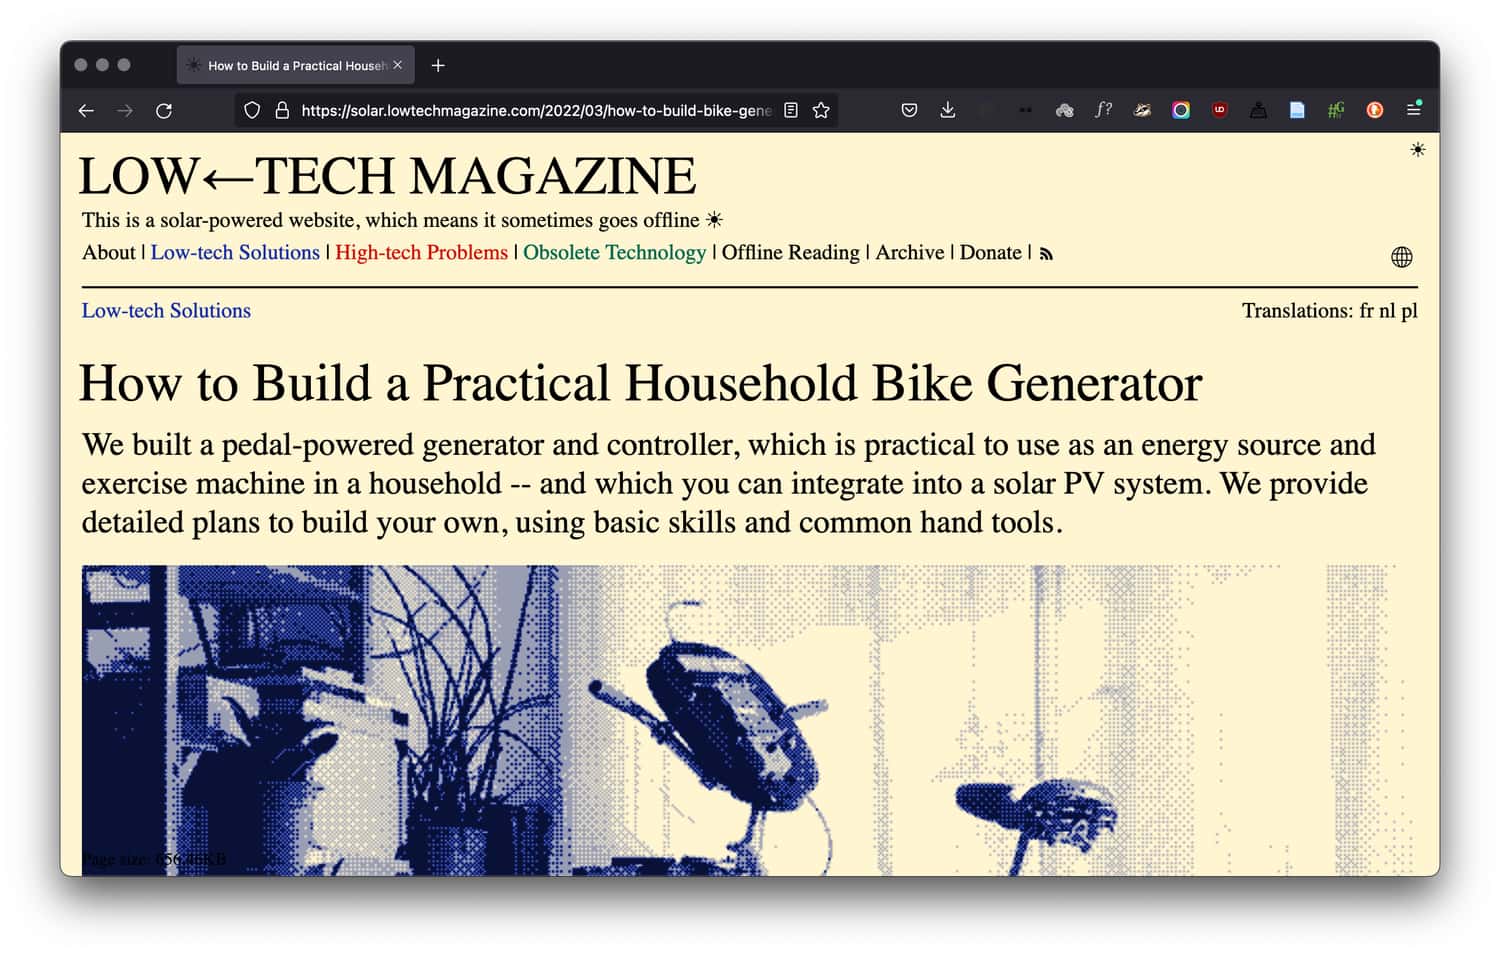 An article and construction guide are available online.